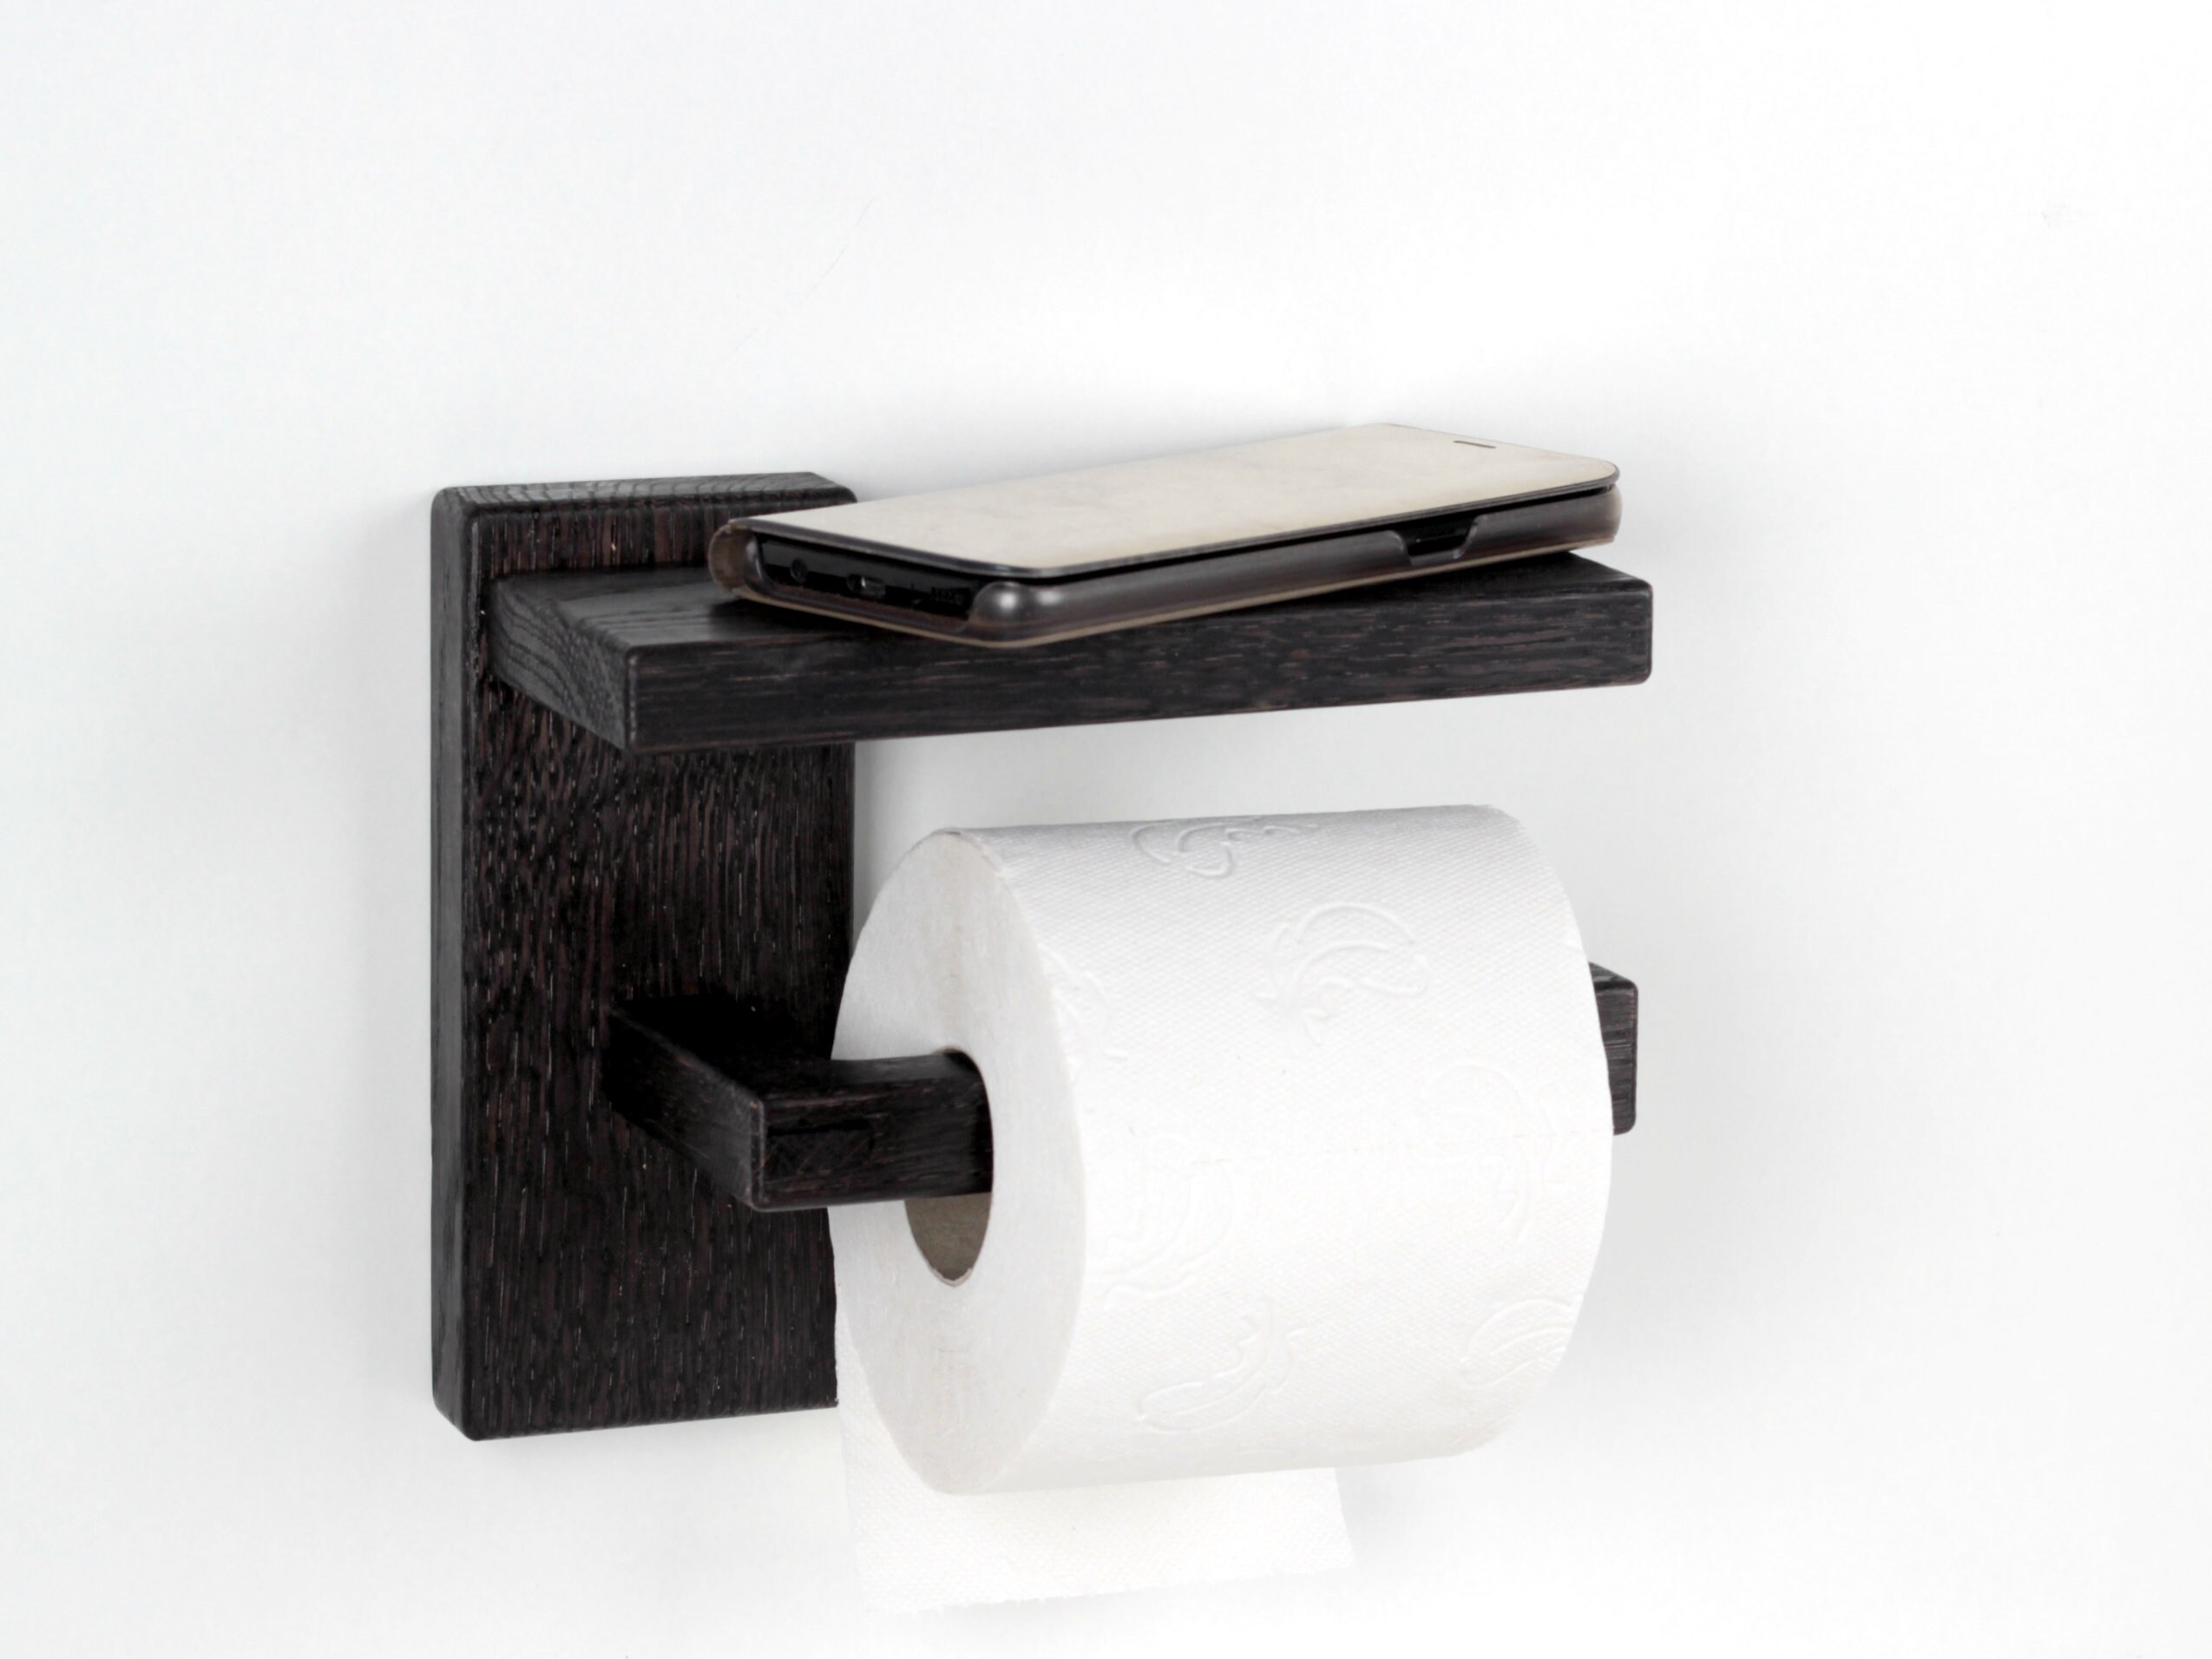 CISILY Black Toilet Paper Holder Stand with Phone Shelf, Bathroom Toliet  Decor Decoration. Tissue Roll Free Standing Storage, Rv Accessories